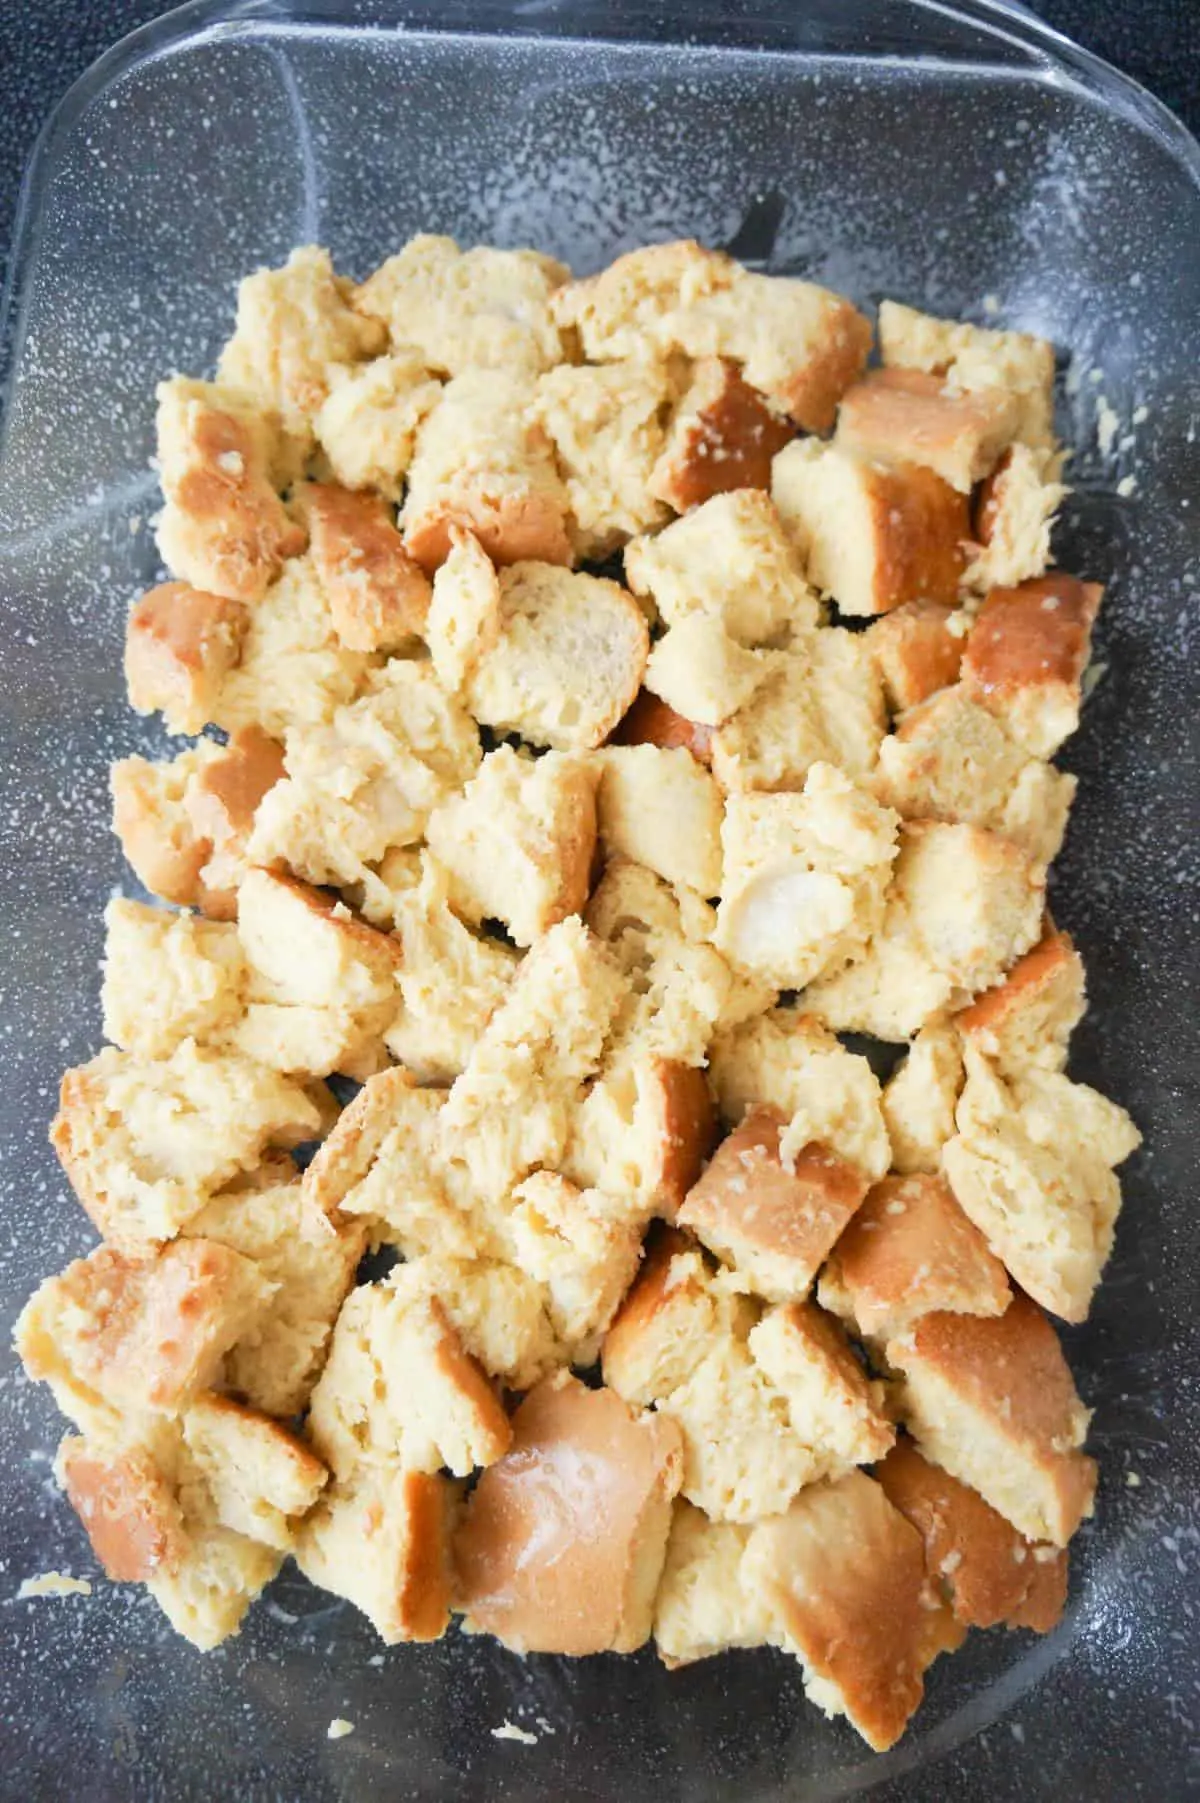 cubed bread in a baking dish